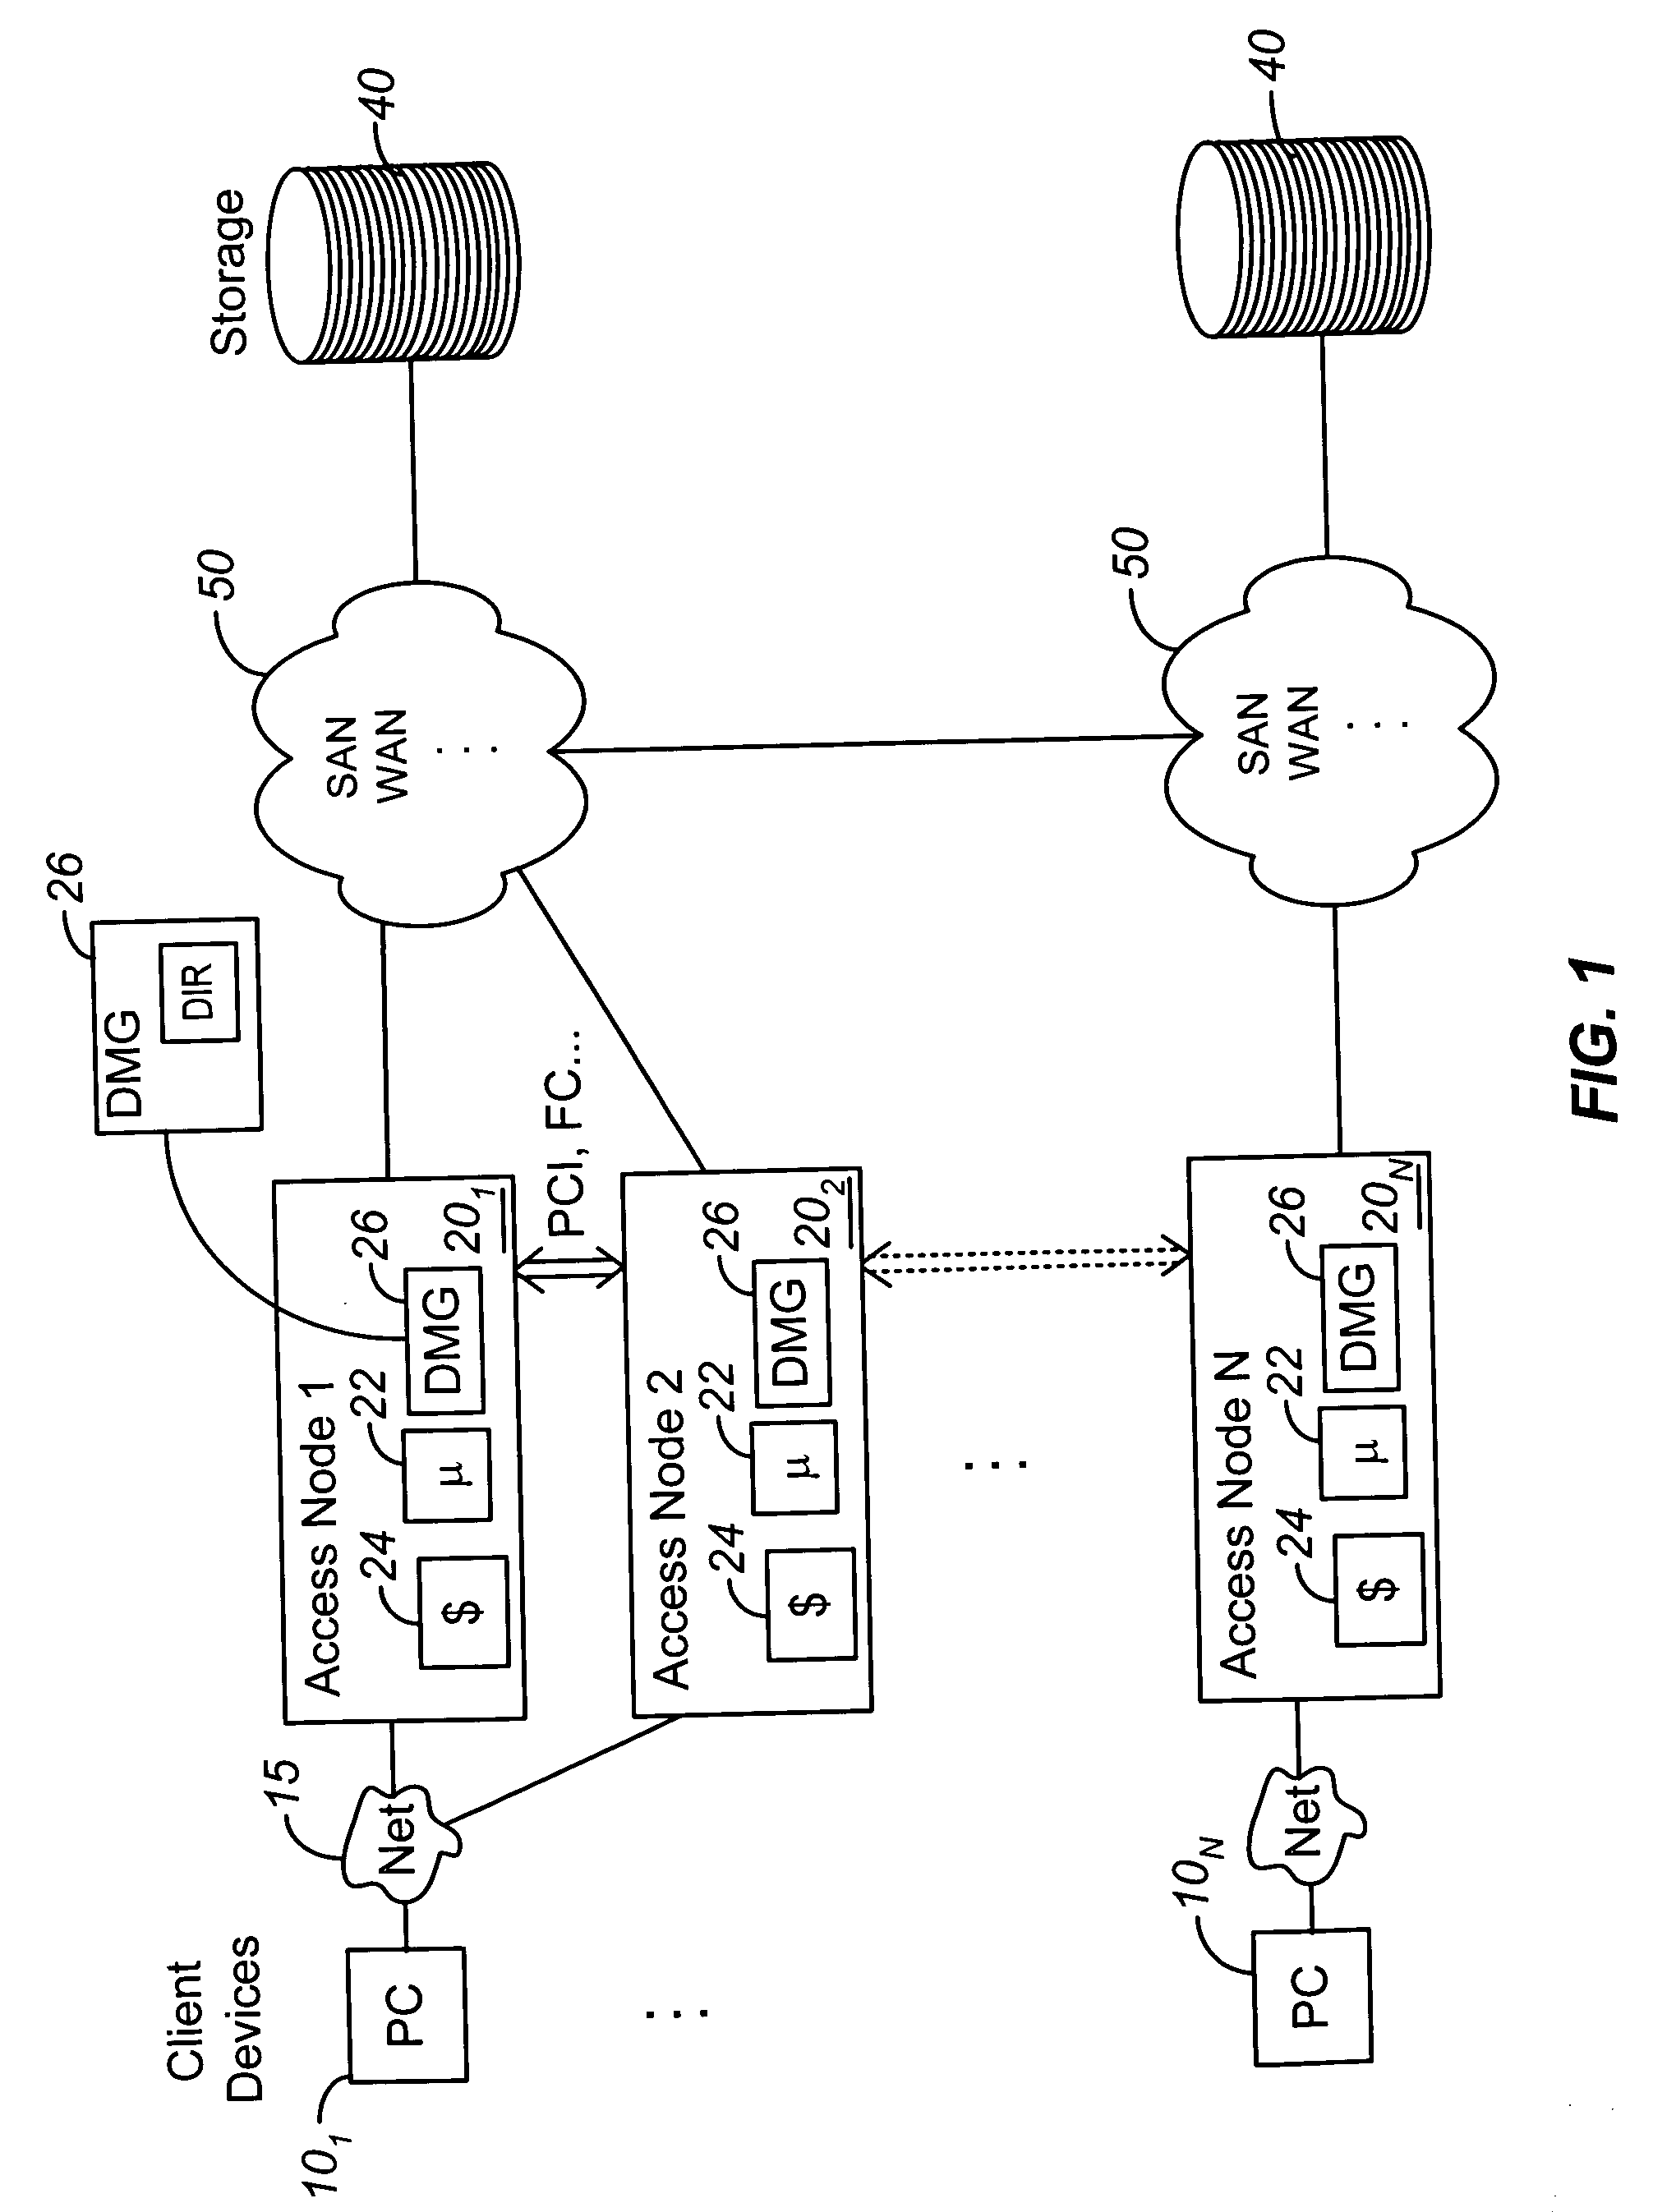 Systems and methods for providing distributed cache coherence